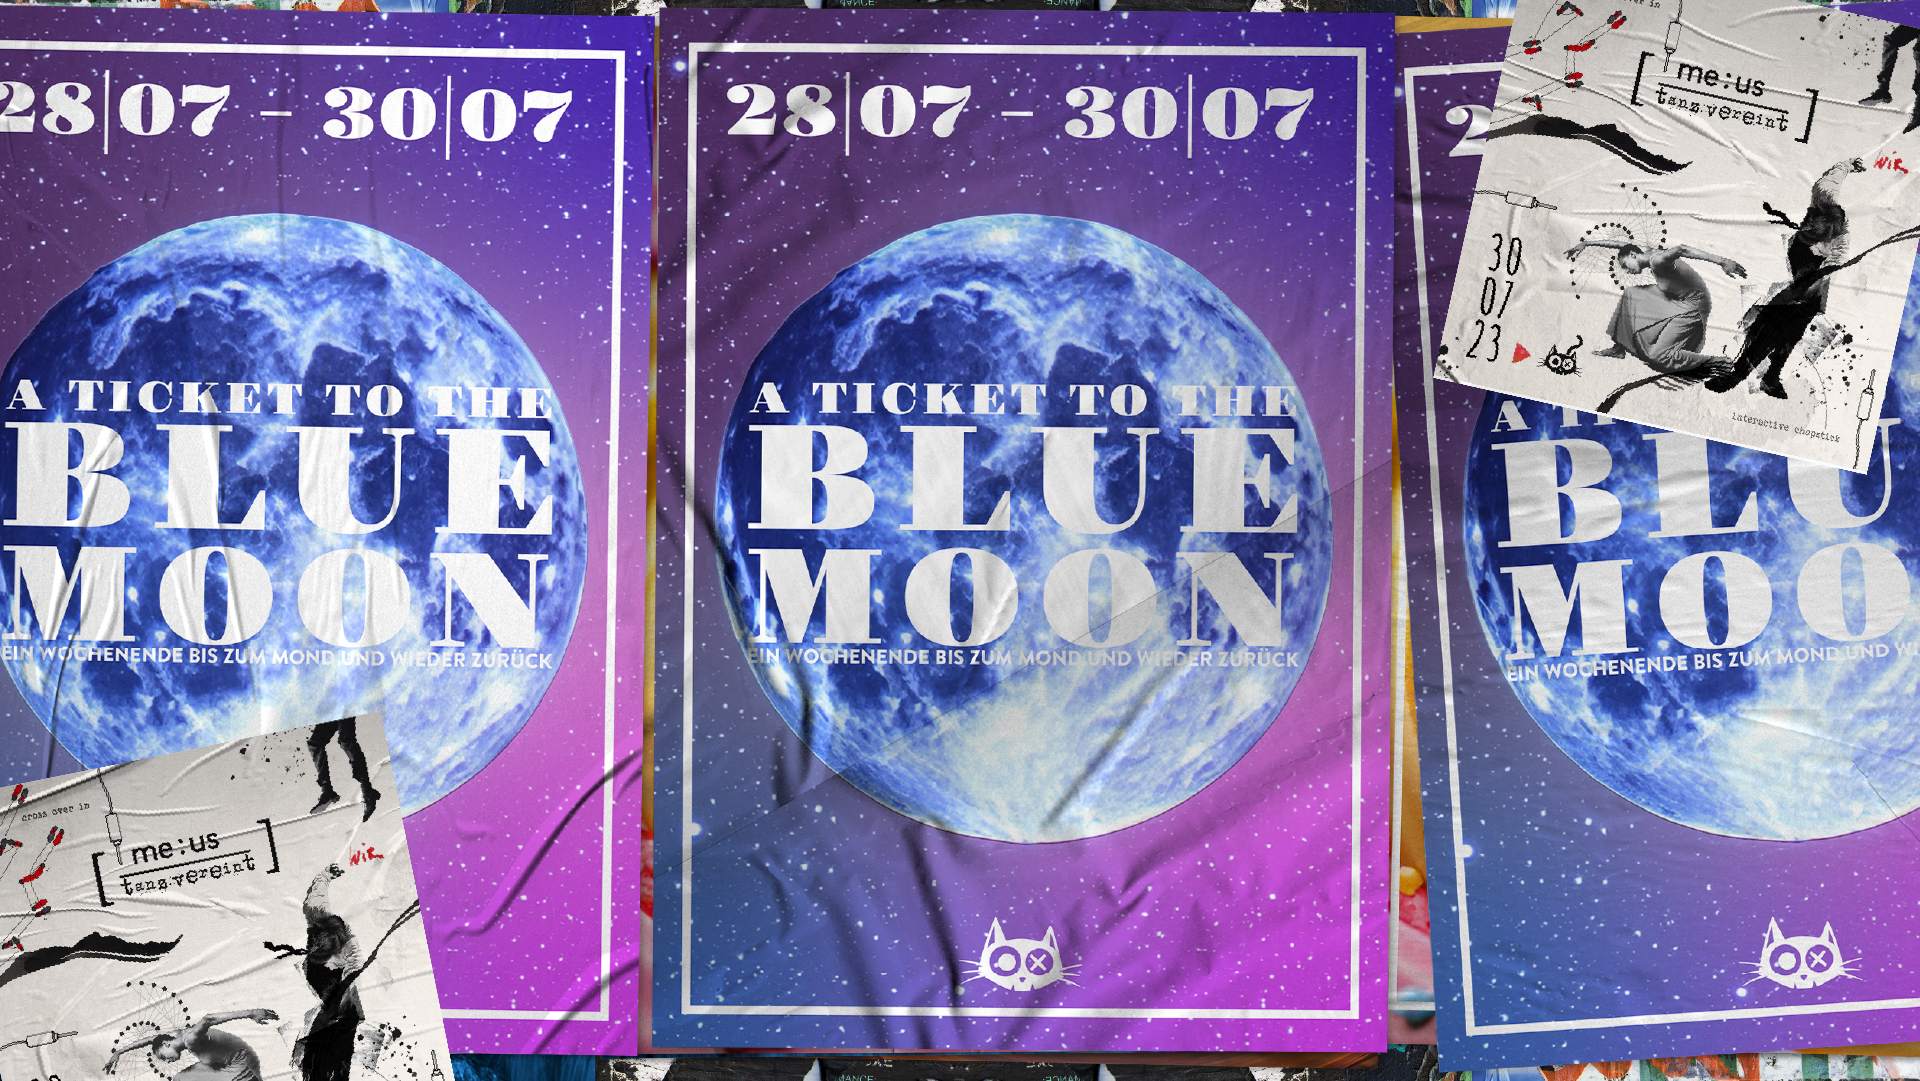 A TICKET TO THE BLUE MOON - フライヤー表